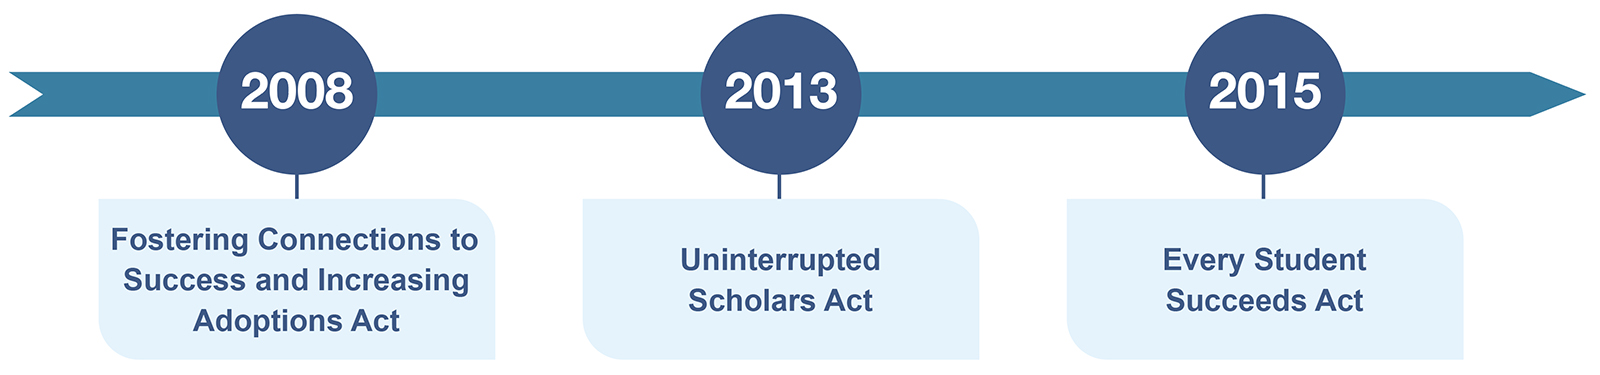 Timeline visual representation of Legislative Milestones for the Educational Stability of Foster Care Youth. 2008 - Fostering Connections to Success and Increasing Adoptions Act. 2013 - Uninterrupted Scholars Act. 2015 - Every Student Succeeds Act.